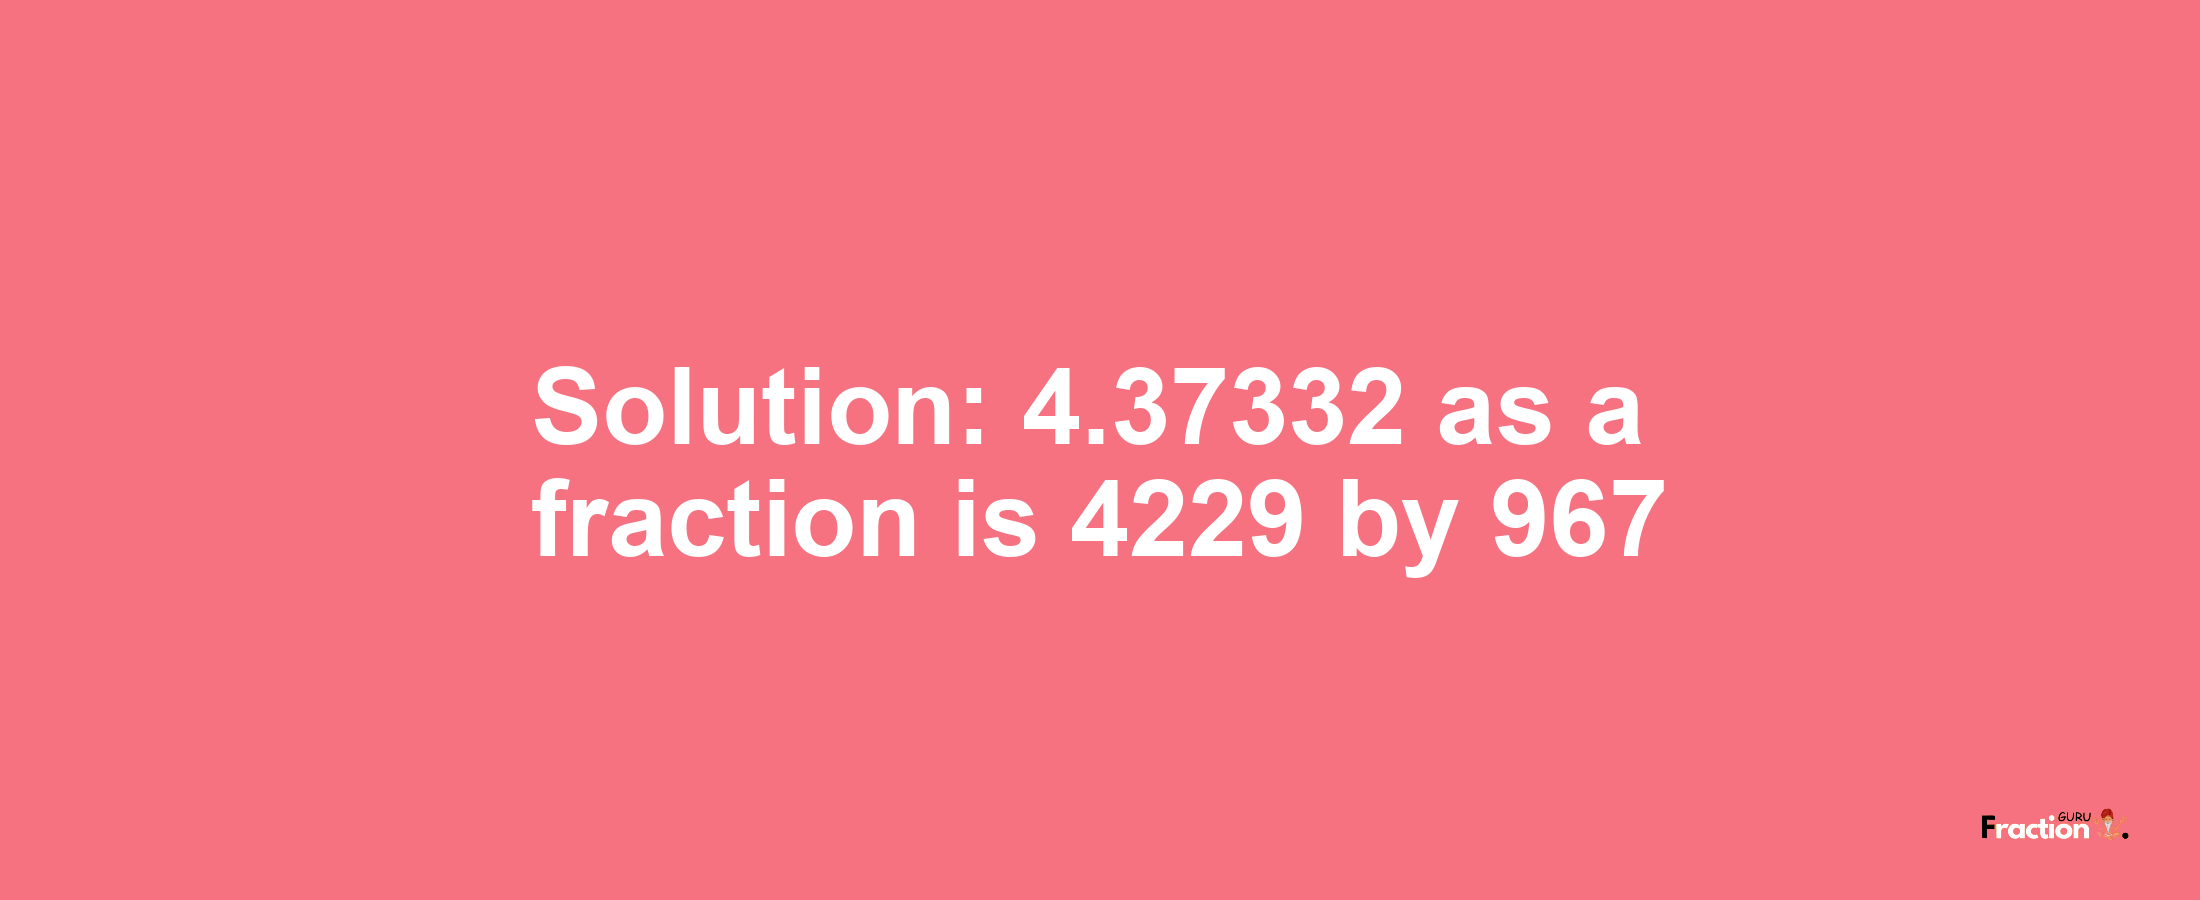 Solution:4.37332 as a fraction is 4229/967